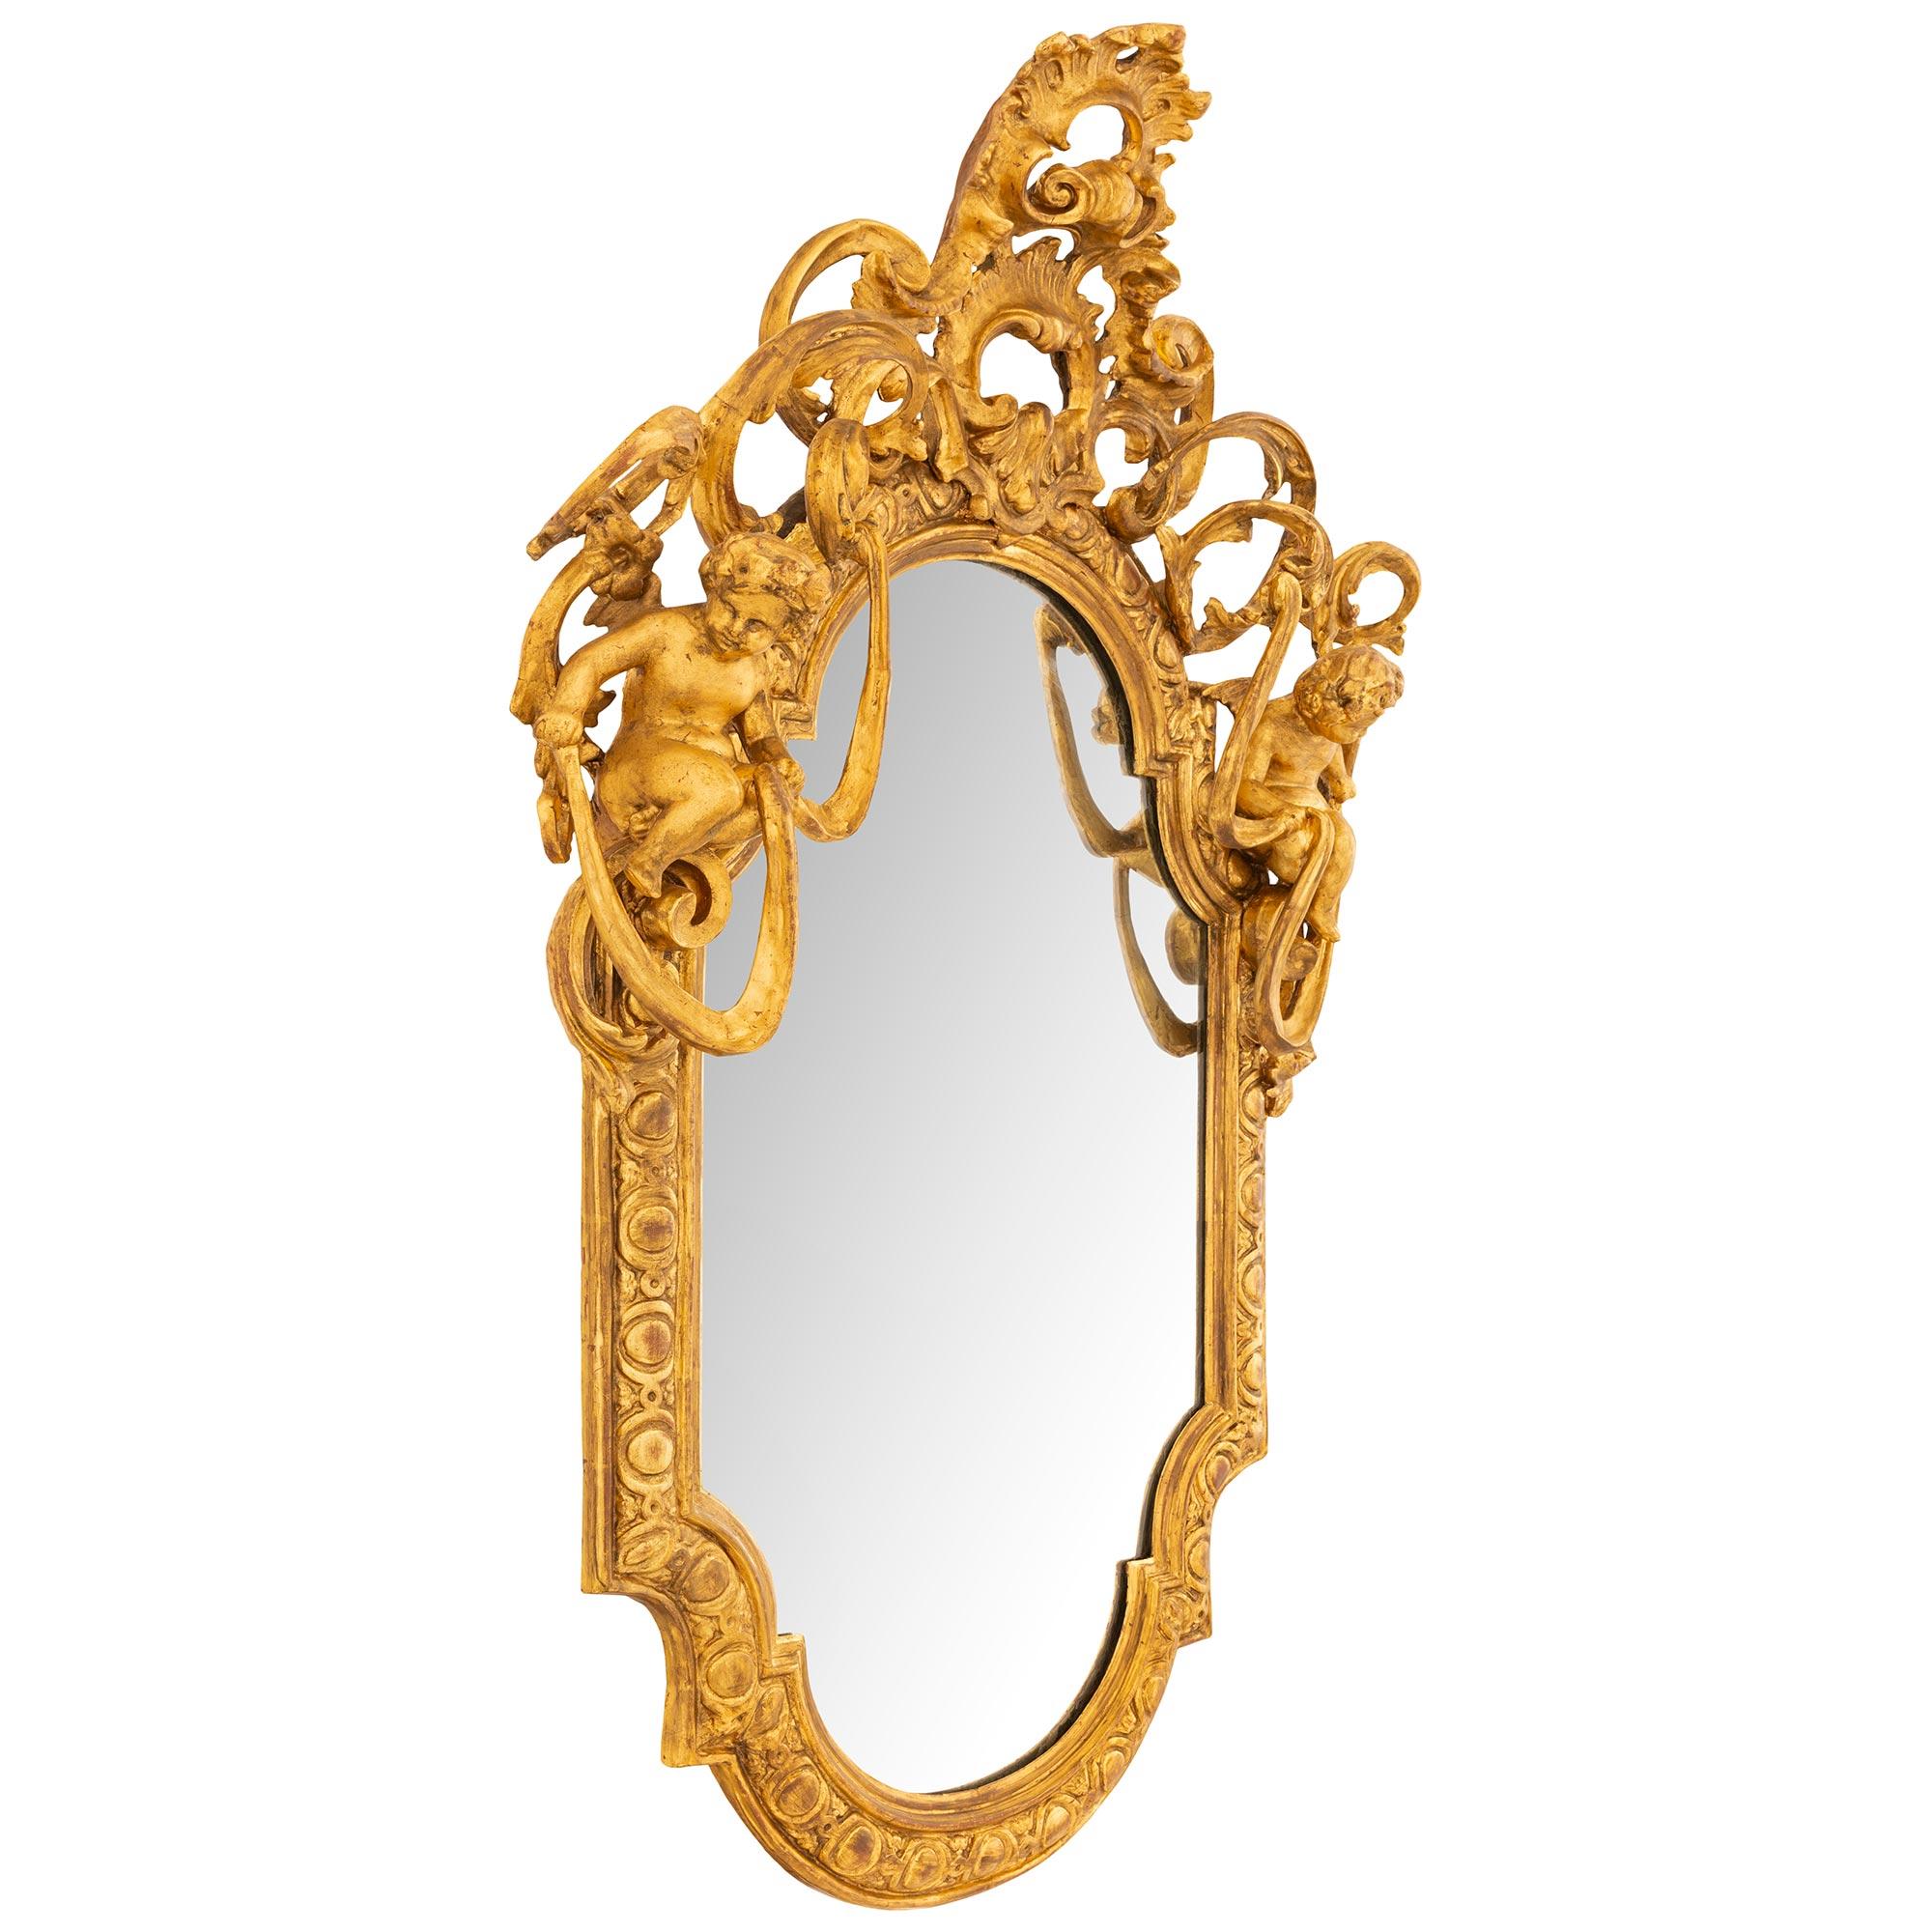 A very high quality and most elegant Italian 18th century giltwood mirror. The frame with a very attractive and richly carved cabochon design has a top central shell amidst a pierced scrolled acanthus leaf design. On both sides are charming cherubs